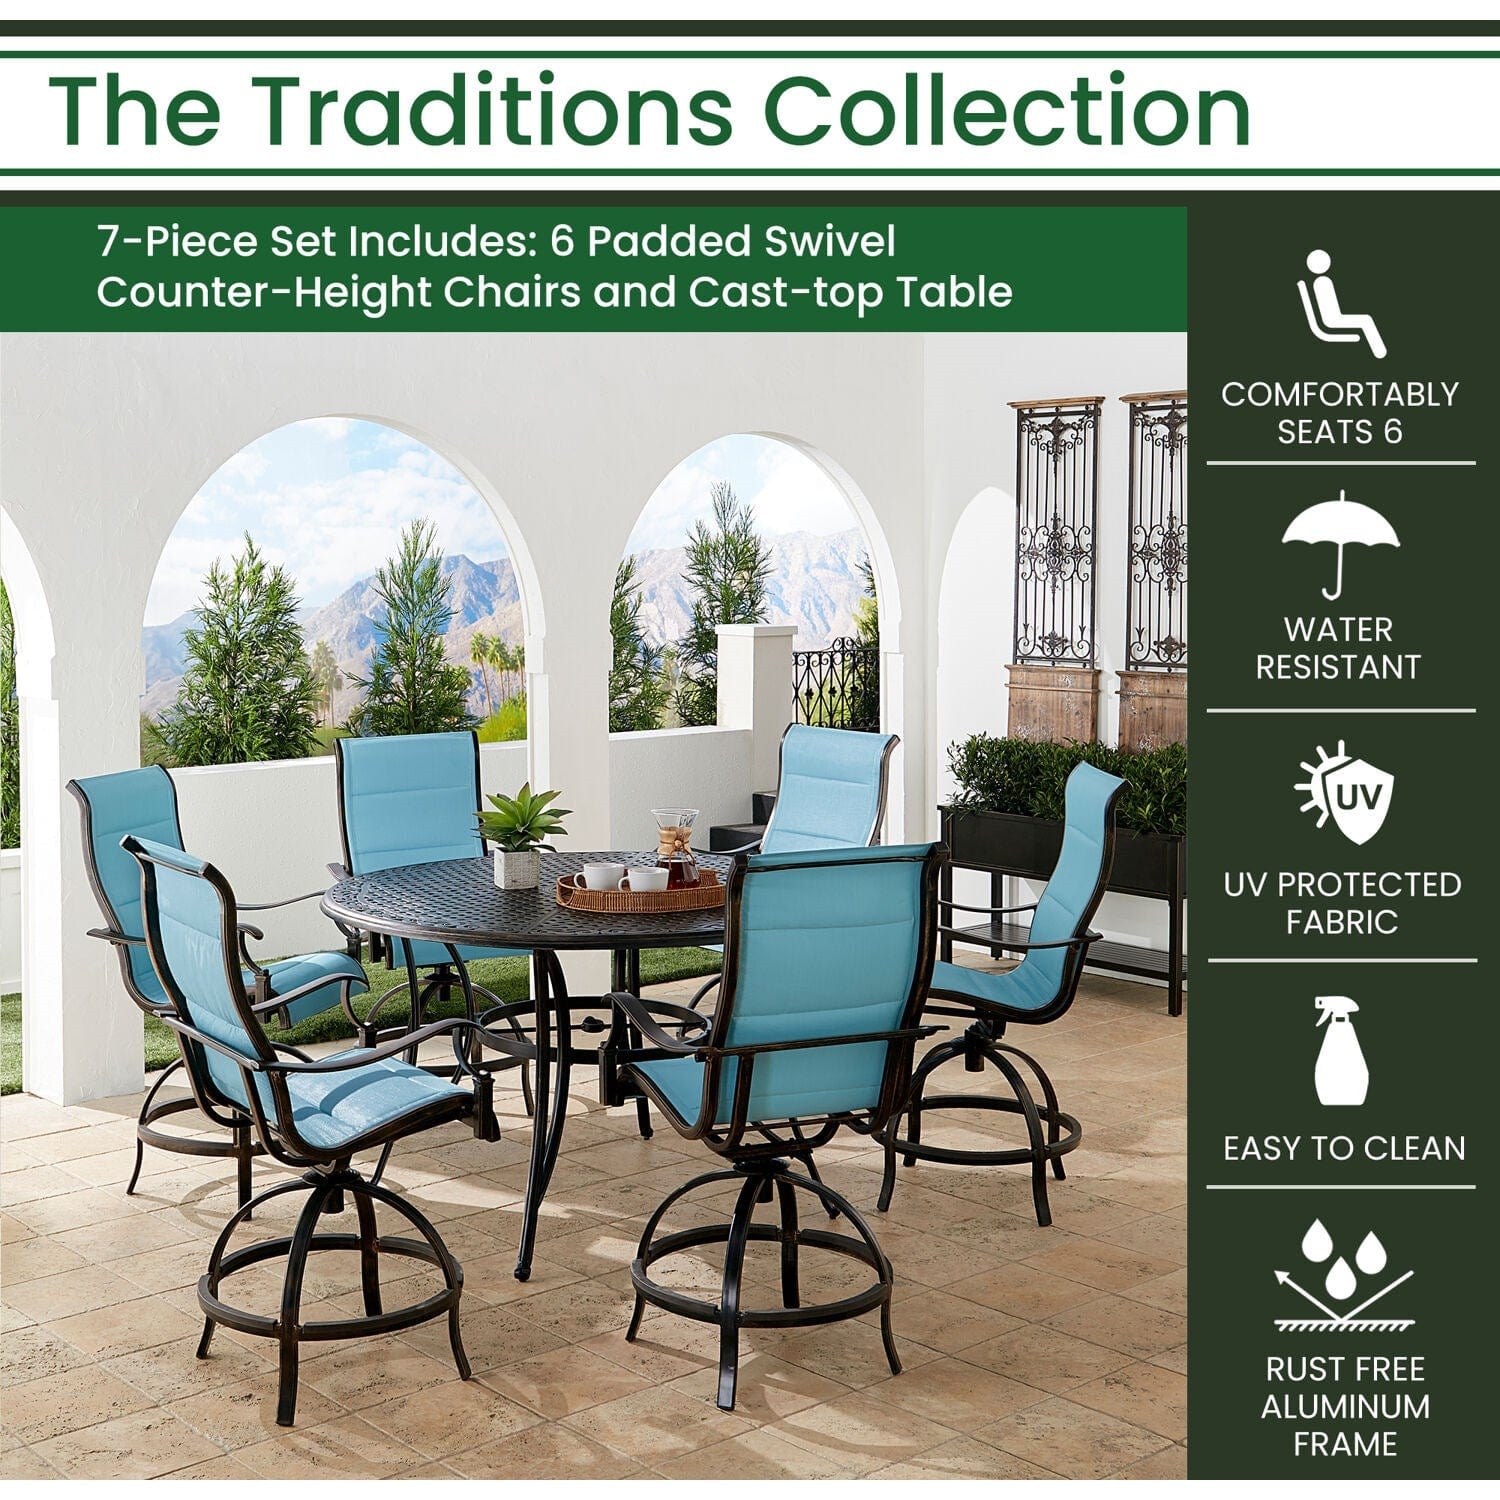 Hanover Outdoor Dining Set Hanover - Traditions 7-Piece Aluminum Frame High-Dining Set in Blue with 6 Padded Swivel Counter-Height Chairs and 56-in. Cast-top Table | TRADDN7PCPDBR-BLU